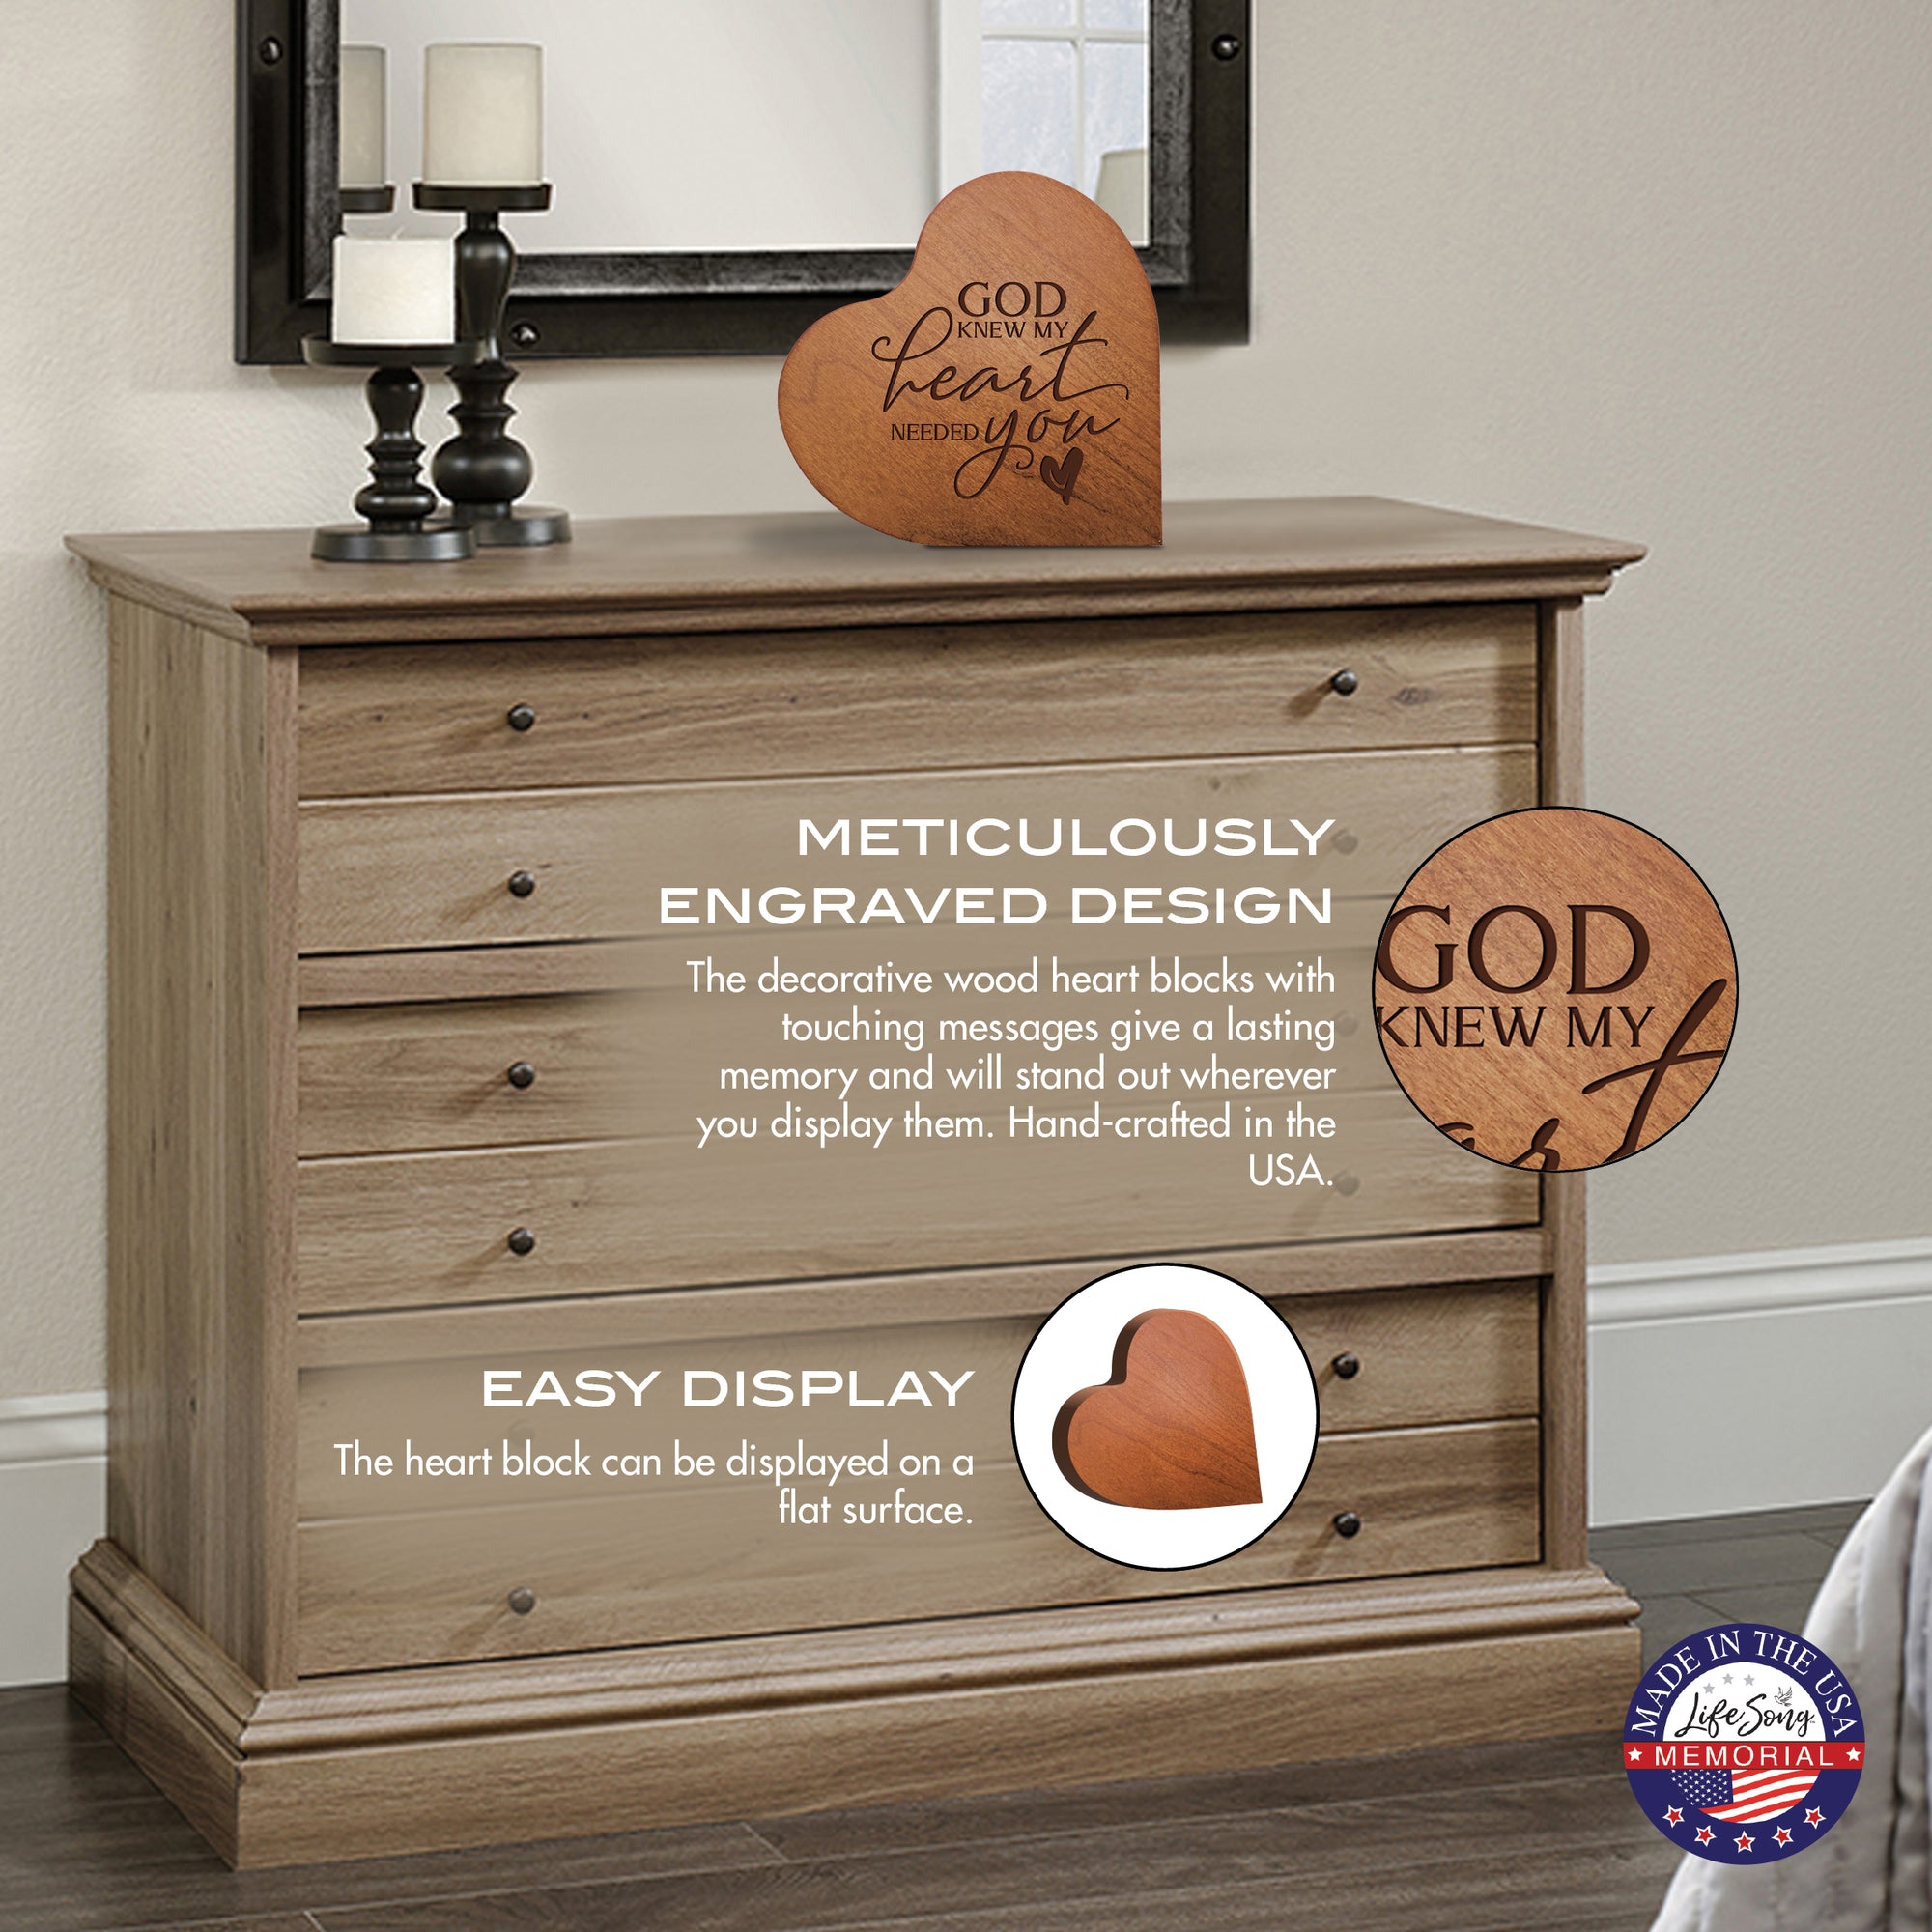 Heartfelt memorial tabletop sign crafted from solid wood, an elegant tribute for loved ones.